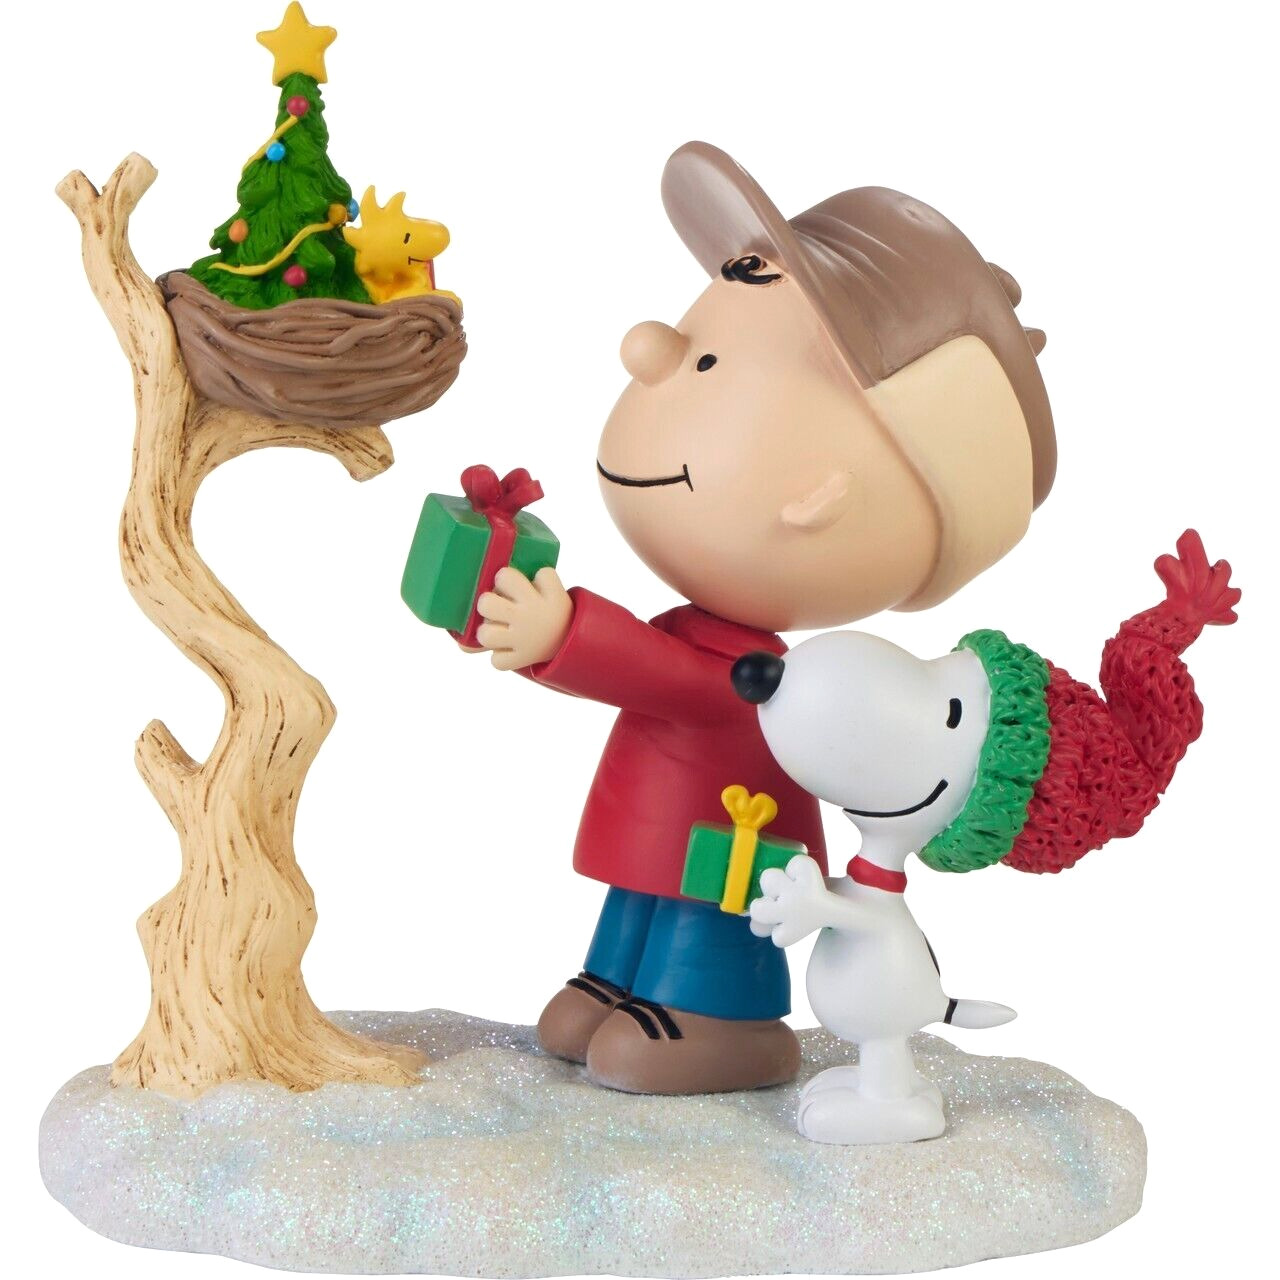 ✿ New PRECIOUS MOMENTS PEANUTS Figurine Snoopy Charlie Brown Christmas Woodstock